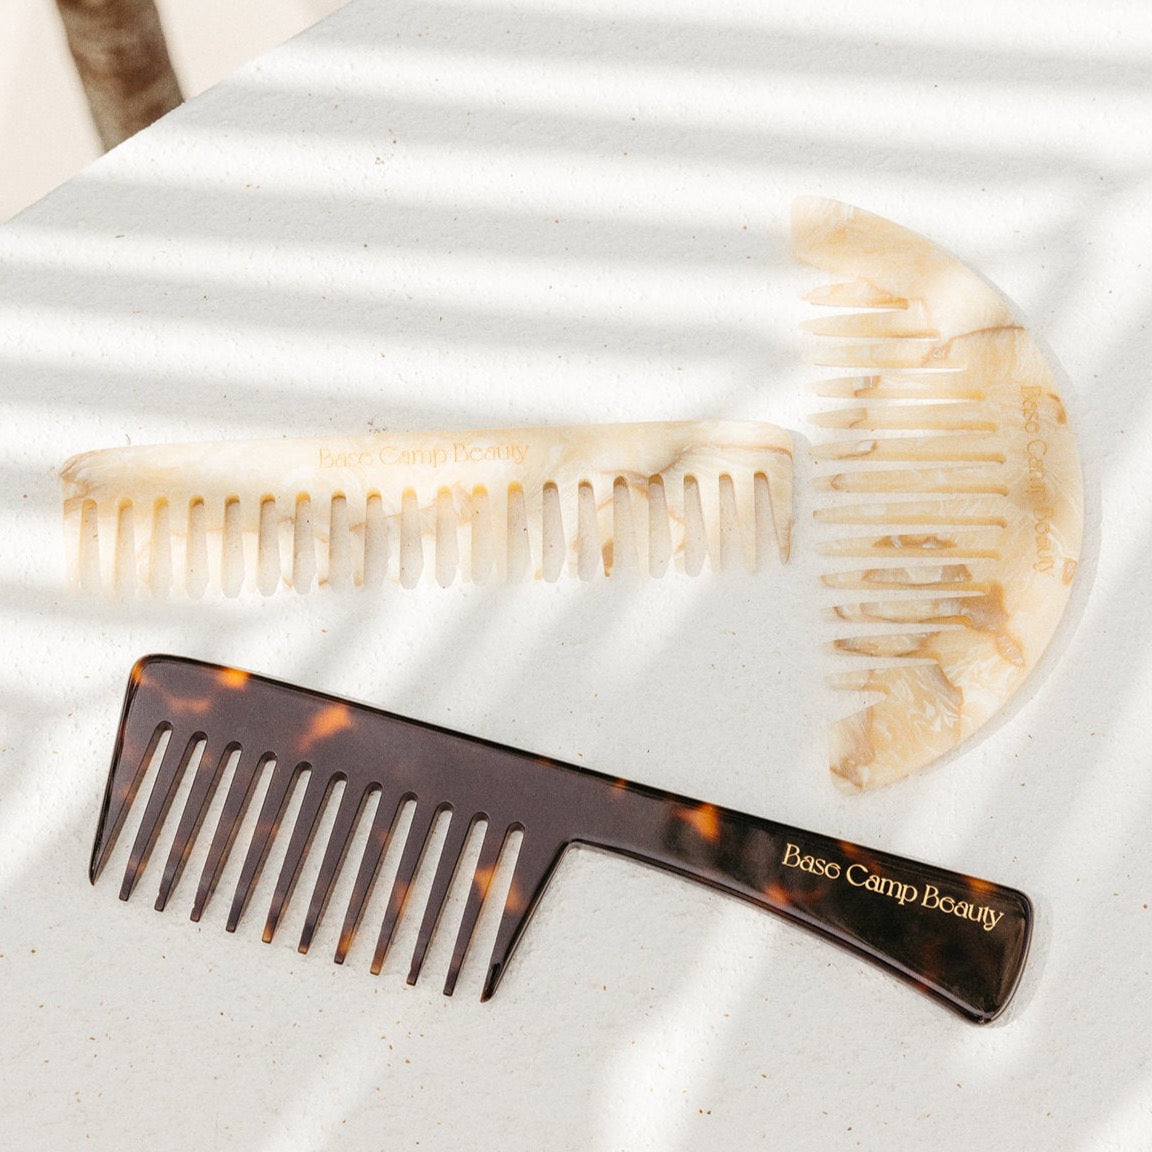 base camp combs by Base Camp Beauty